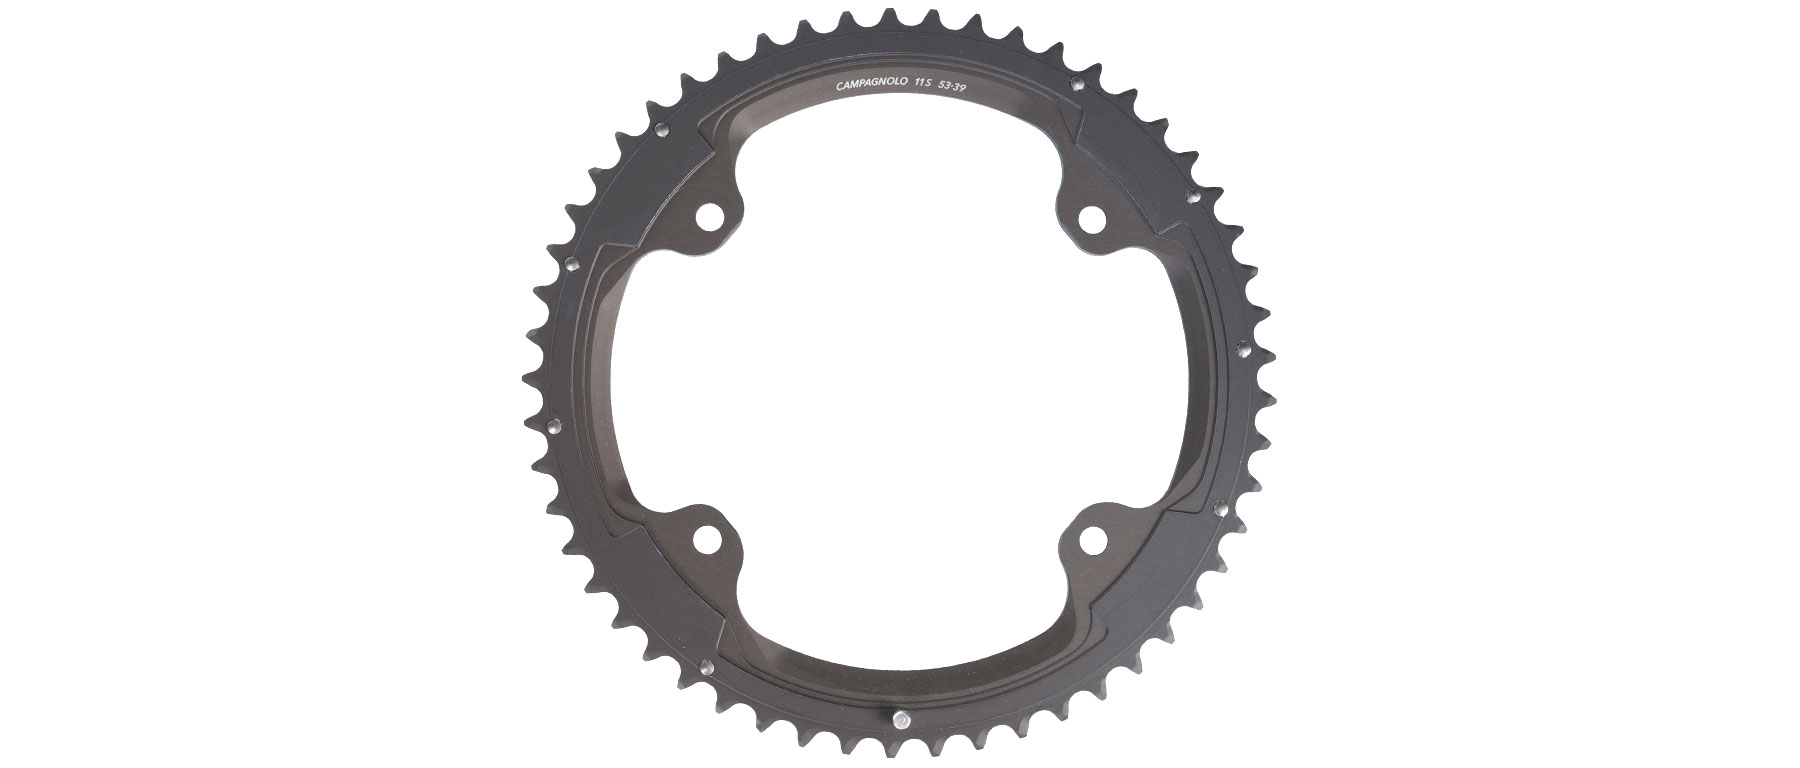 Campagnolo 52T 11 Speed Chainring for 2011-14 Super Record Record and Chorus 